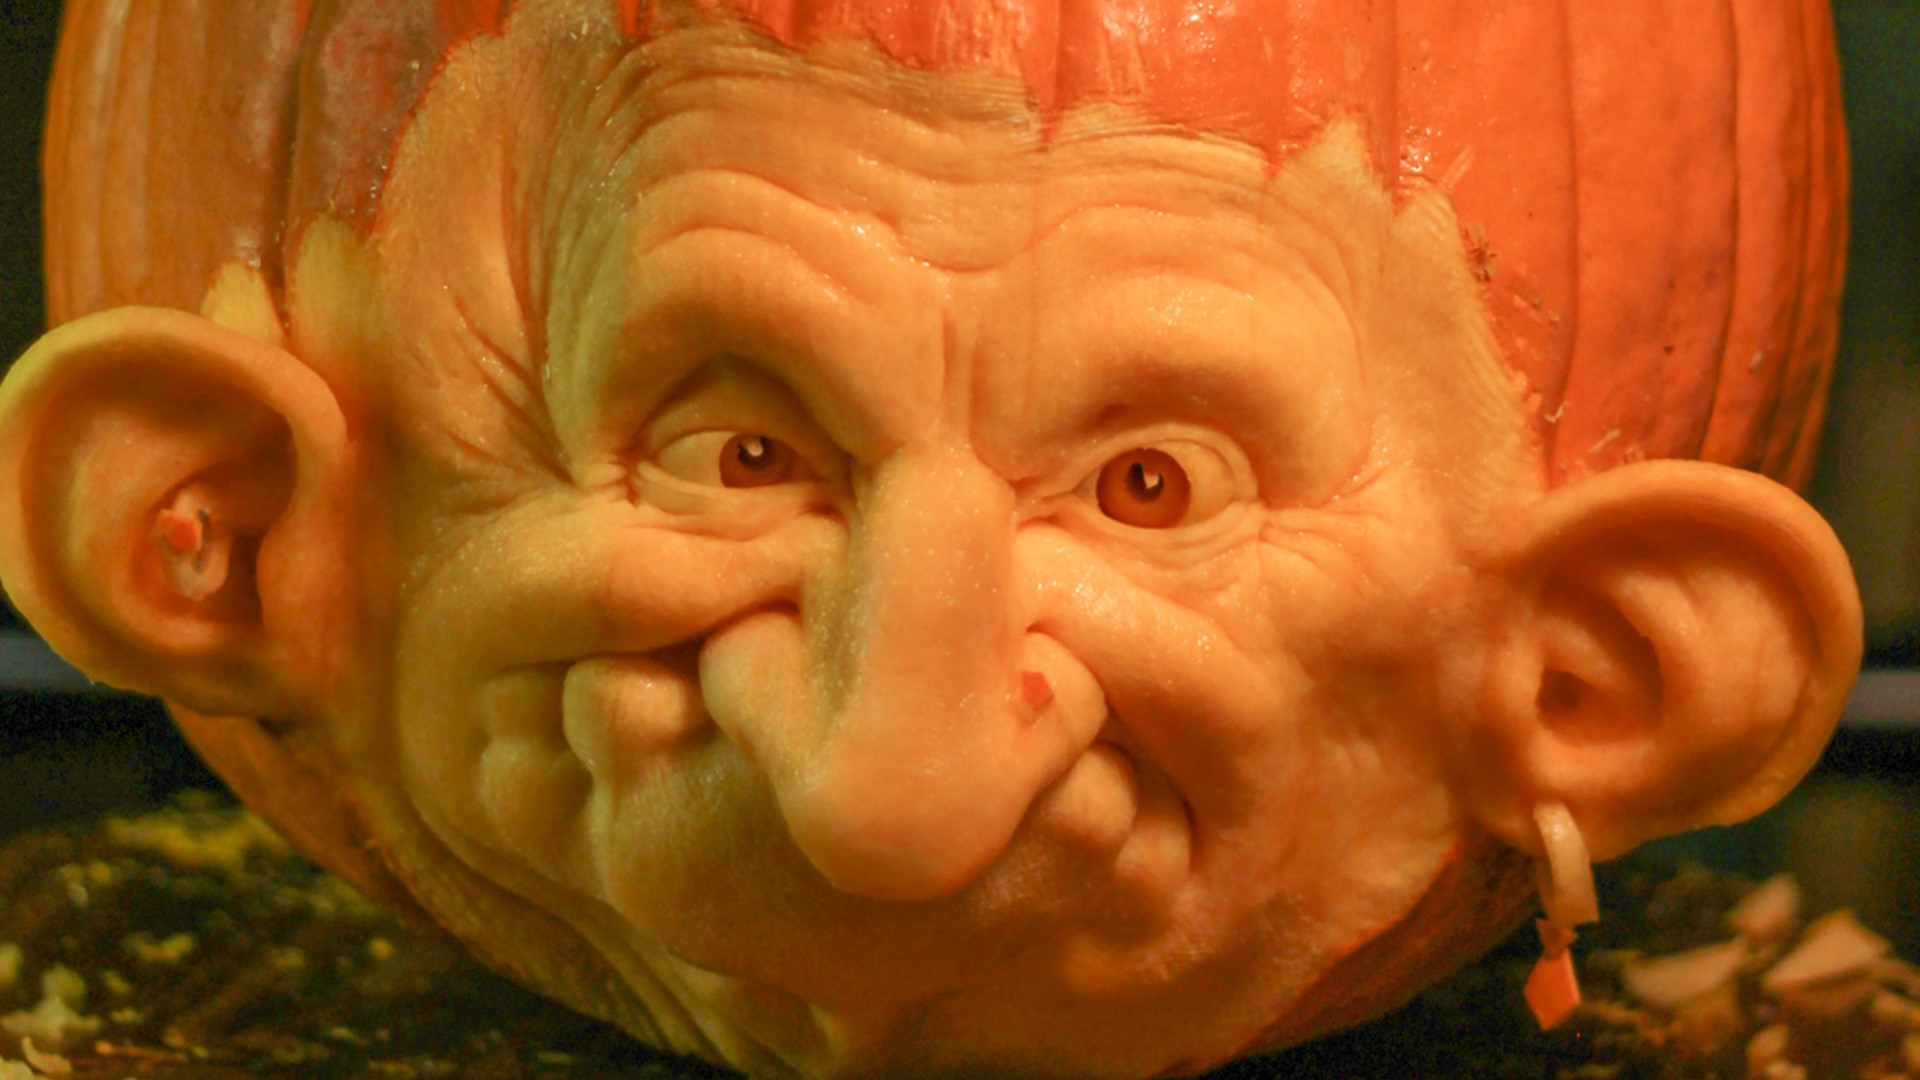 In the last 10 years, Deane Arnold has sculpted thousands of pumpkins.